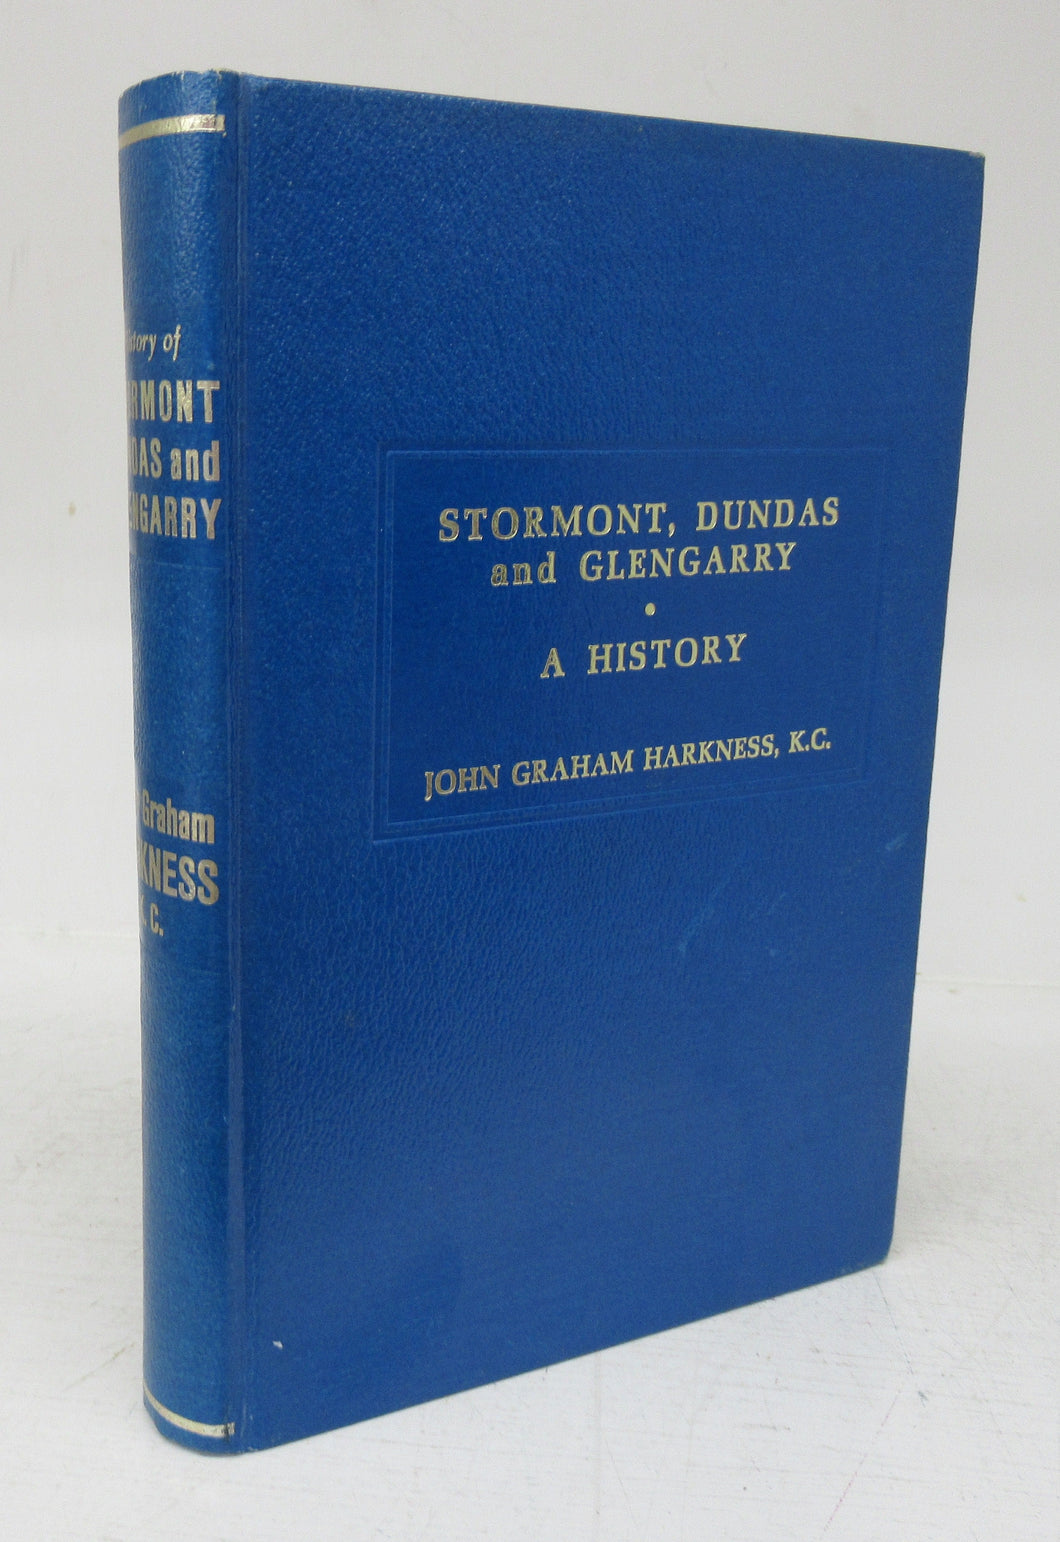 Stormont, Dundas and Glengarry: A History 1784-1945